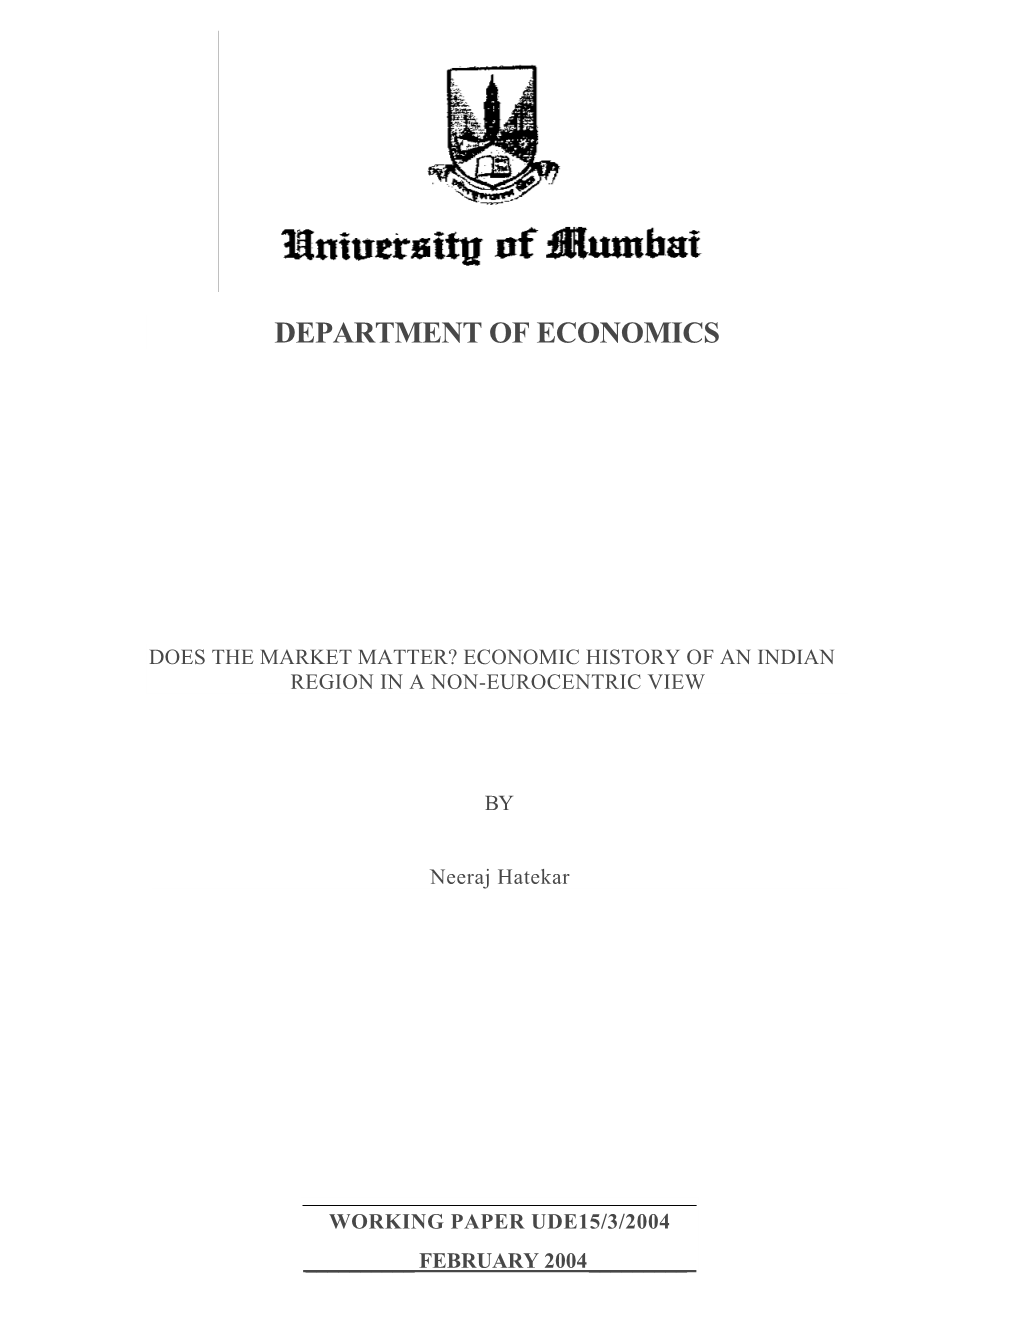 Economic History of an Indian Region in a Non-Eurocentric View